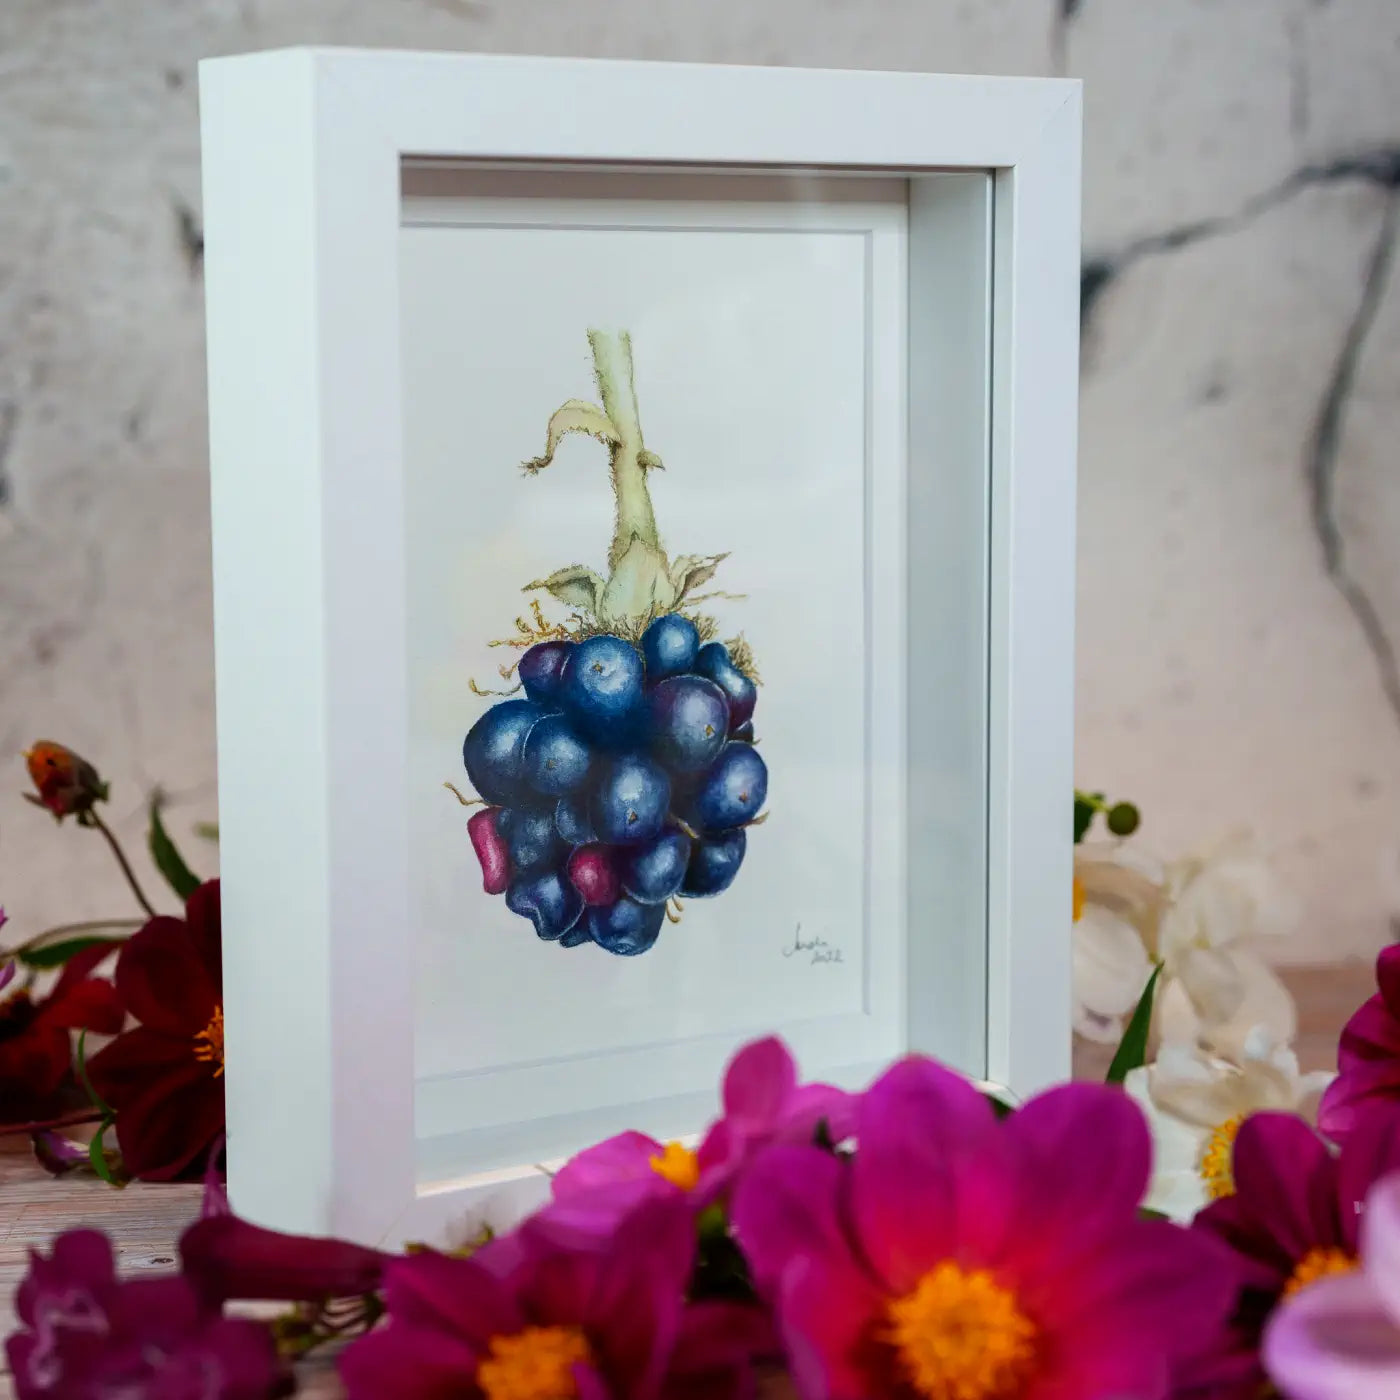 Side angle of the framed watercolour blackberry